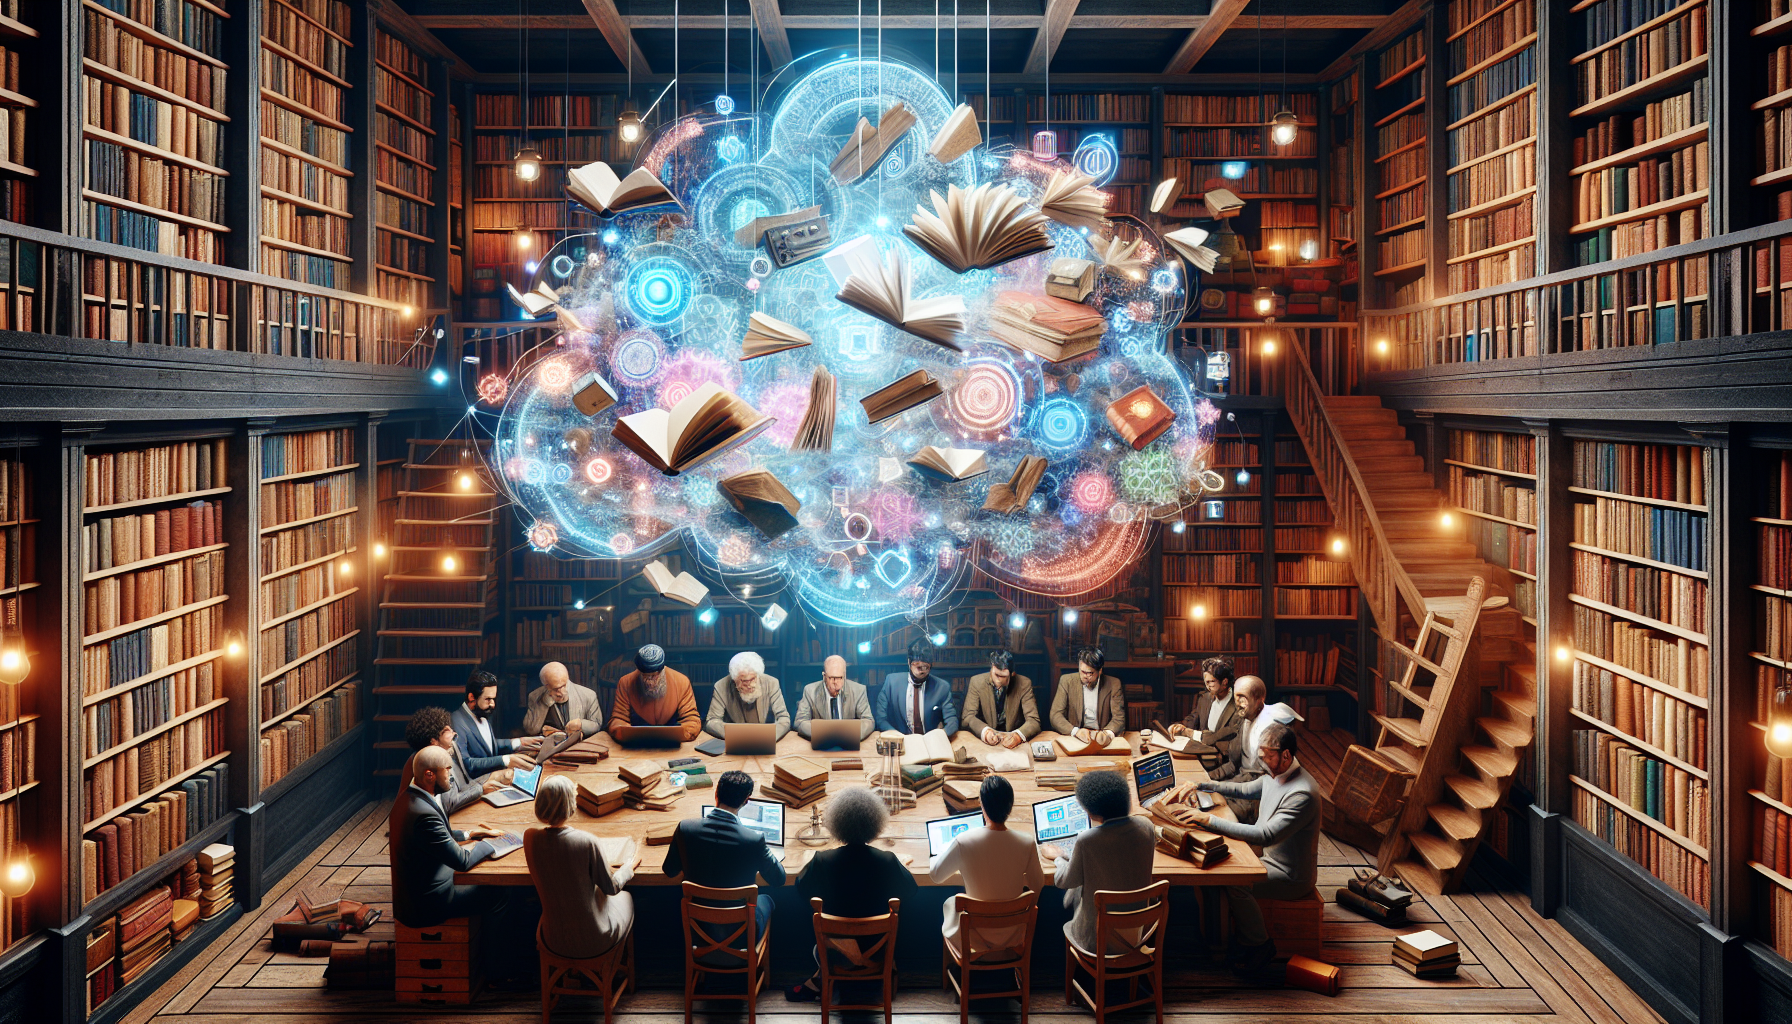 An engaging digital artwork of a cozy, well-lit library with a large wooden table. On the table, various authors from different historical periods and diverse backgrounds are conversing and collaborat